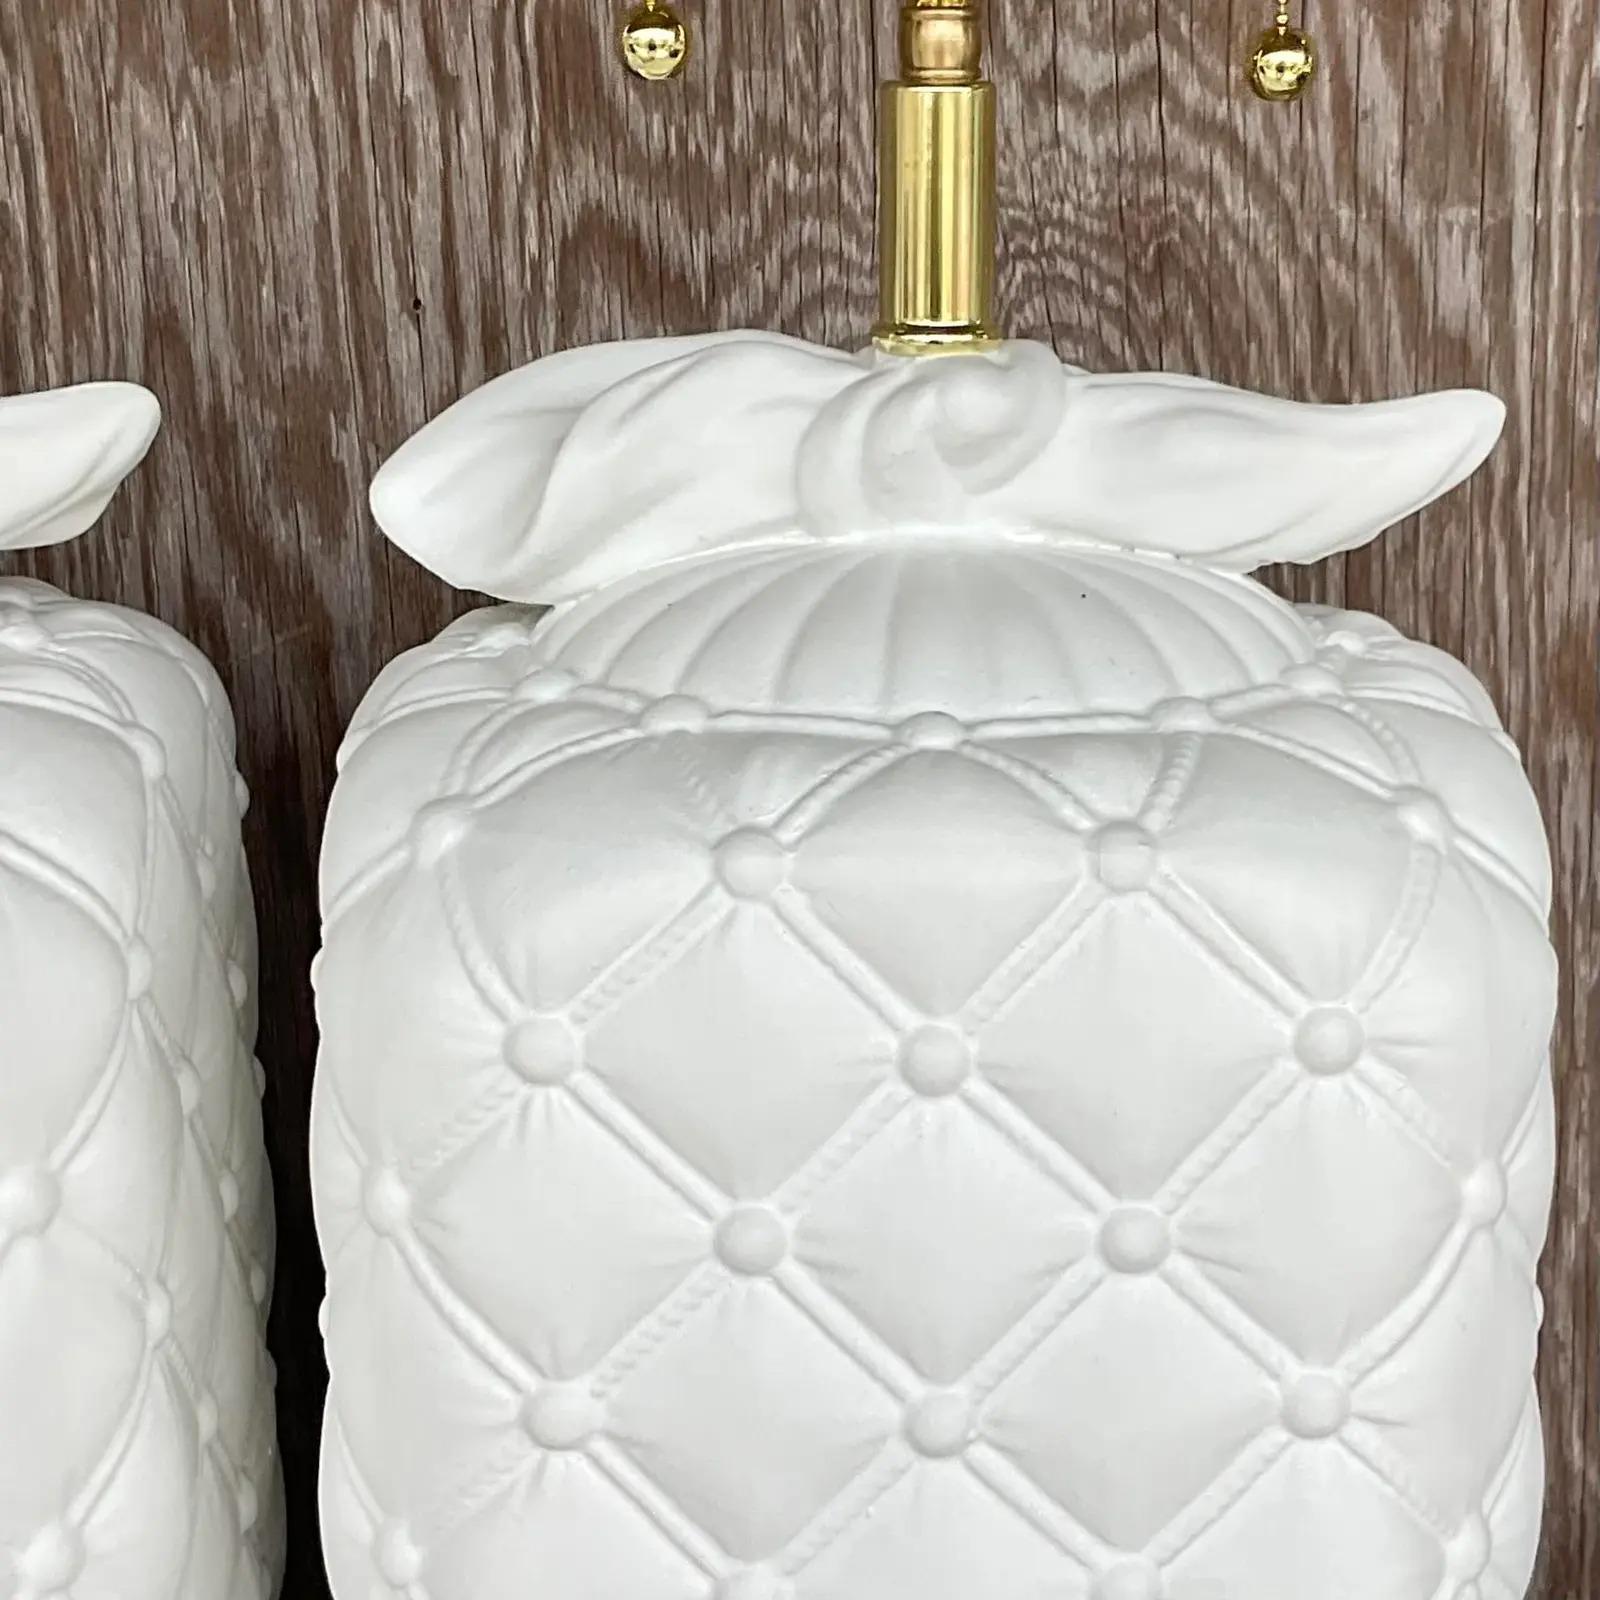 20th Century Vintage Regency Quilted Plaster Table Lamps - a Pair For Sale